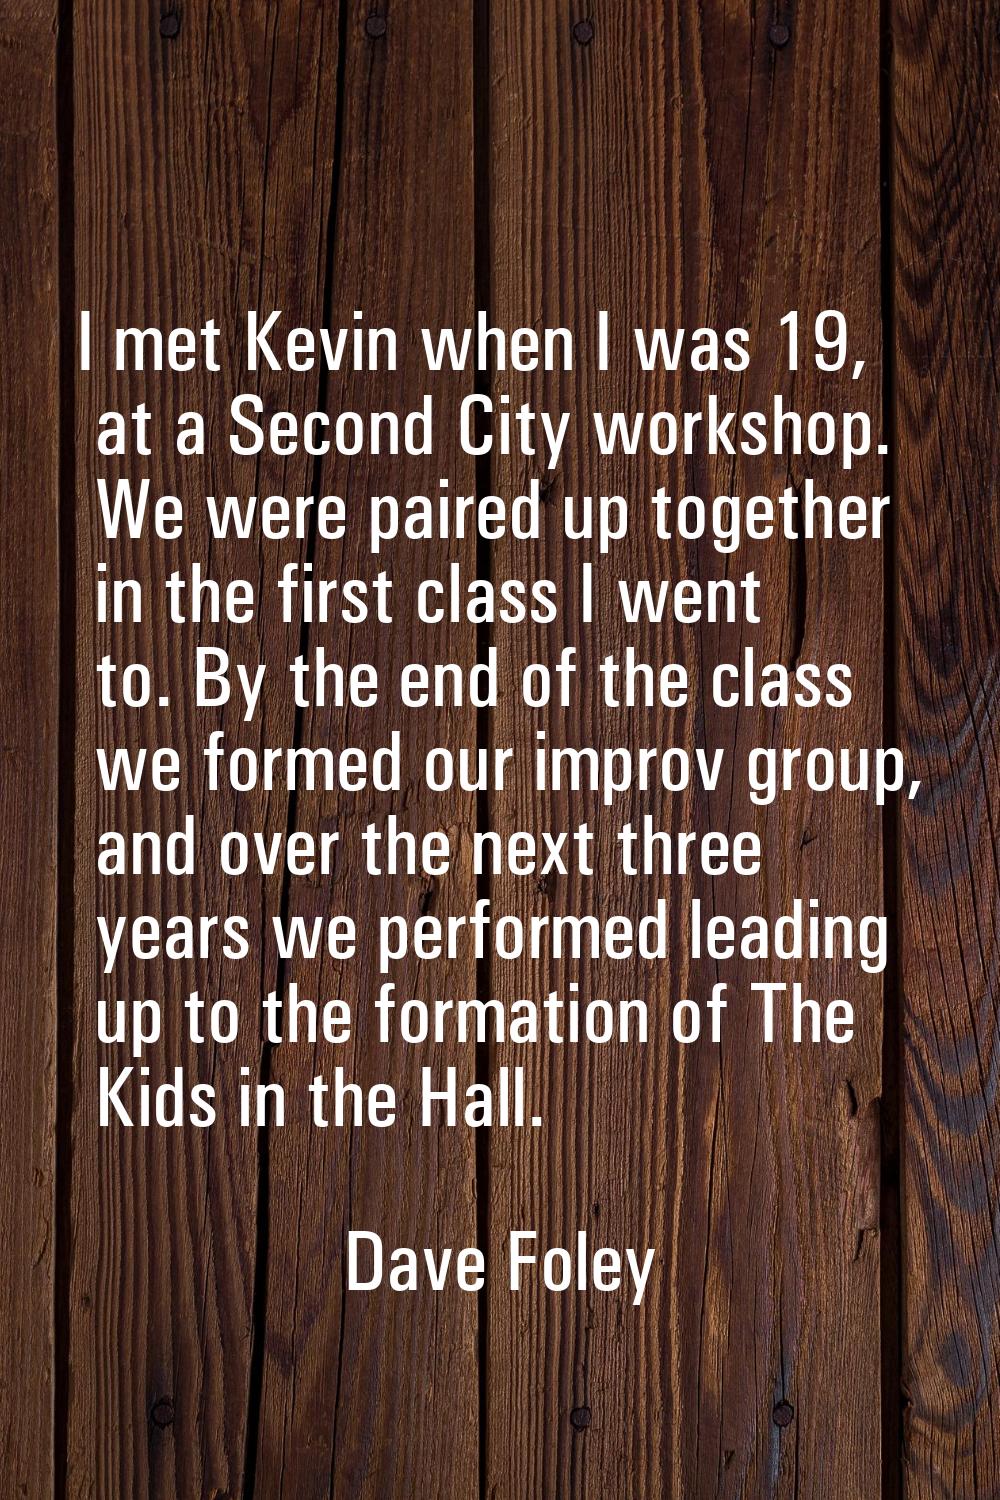 I met Kevin when I was 19, at a Second City workshop. We were paired up together in the first class